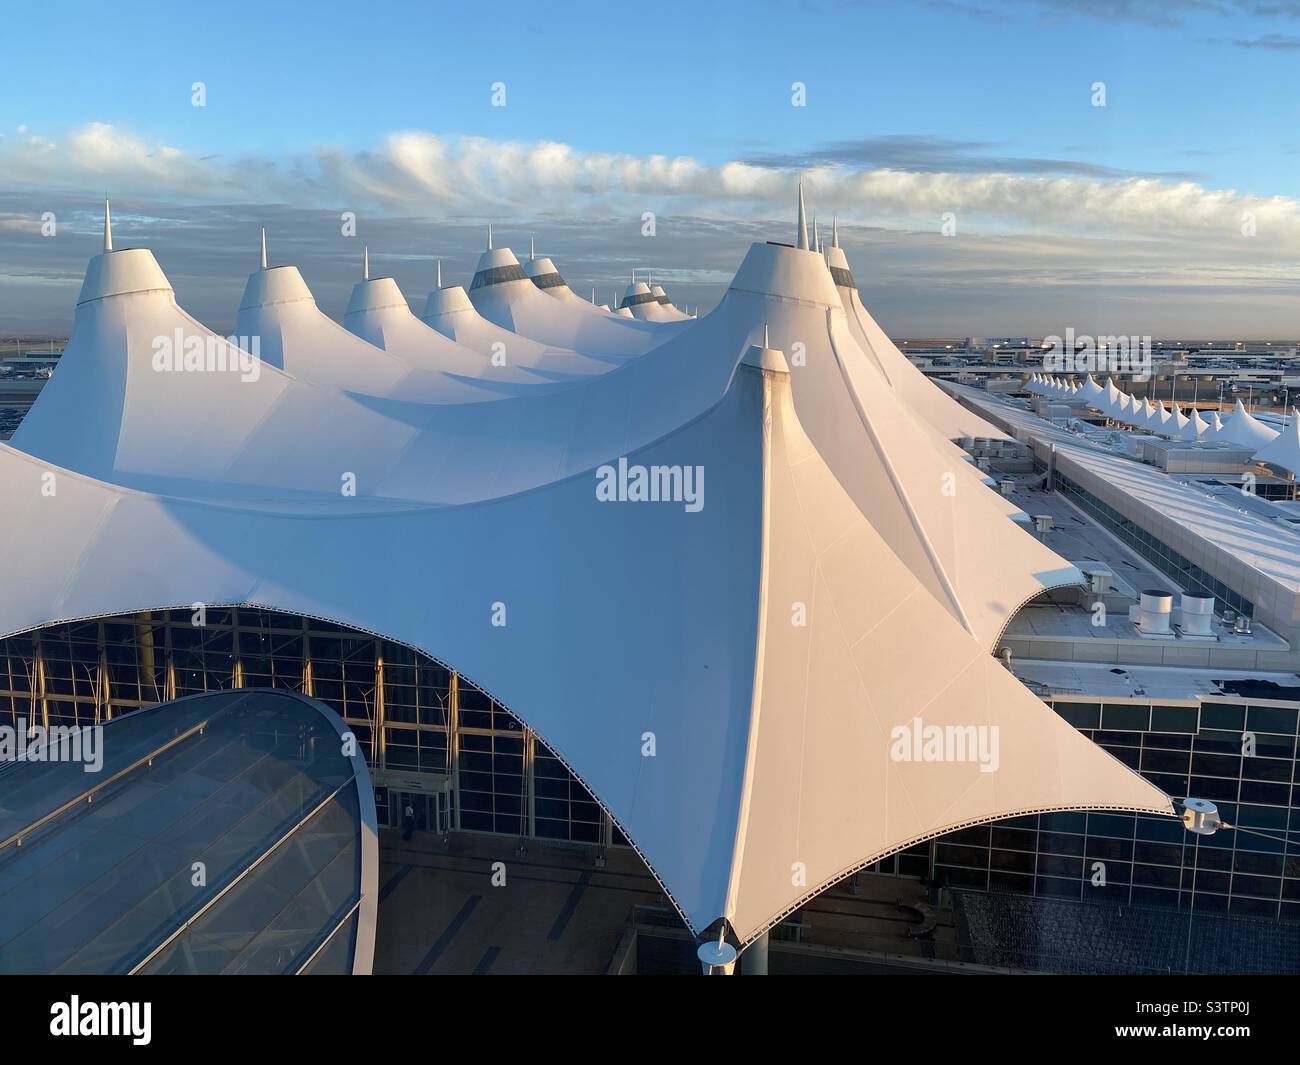 Denver International Airport Terminal Tents covering the building. Stock Photo